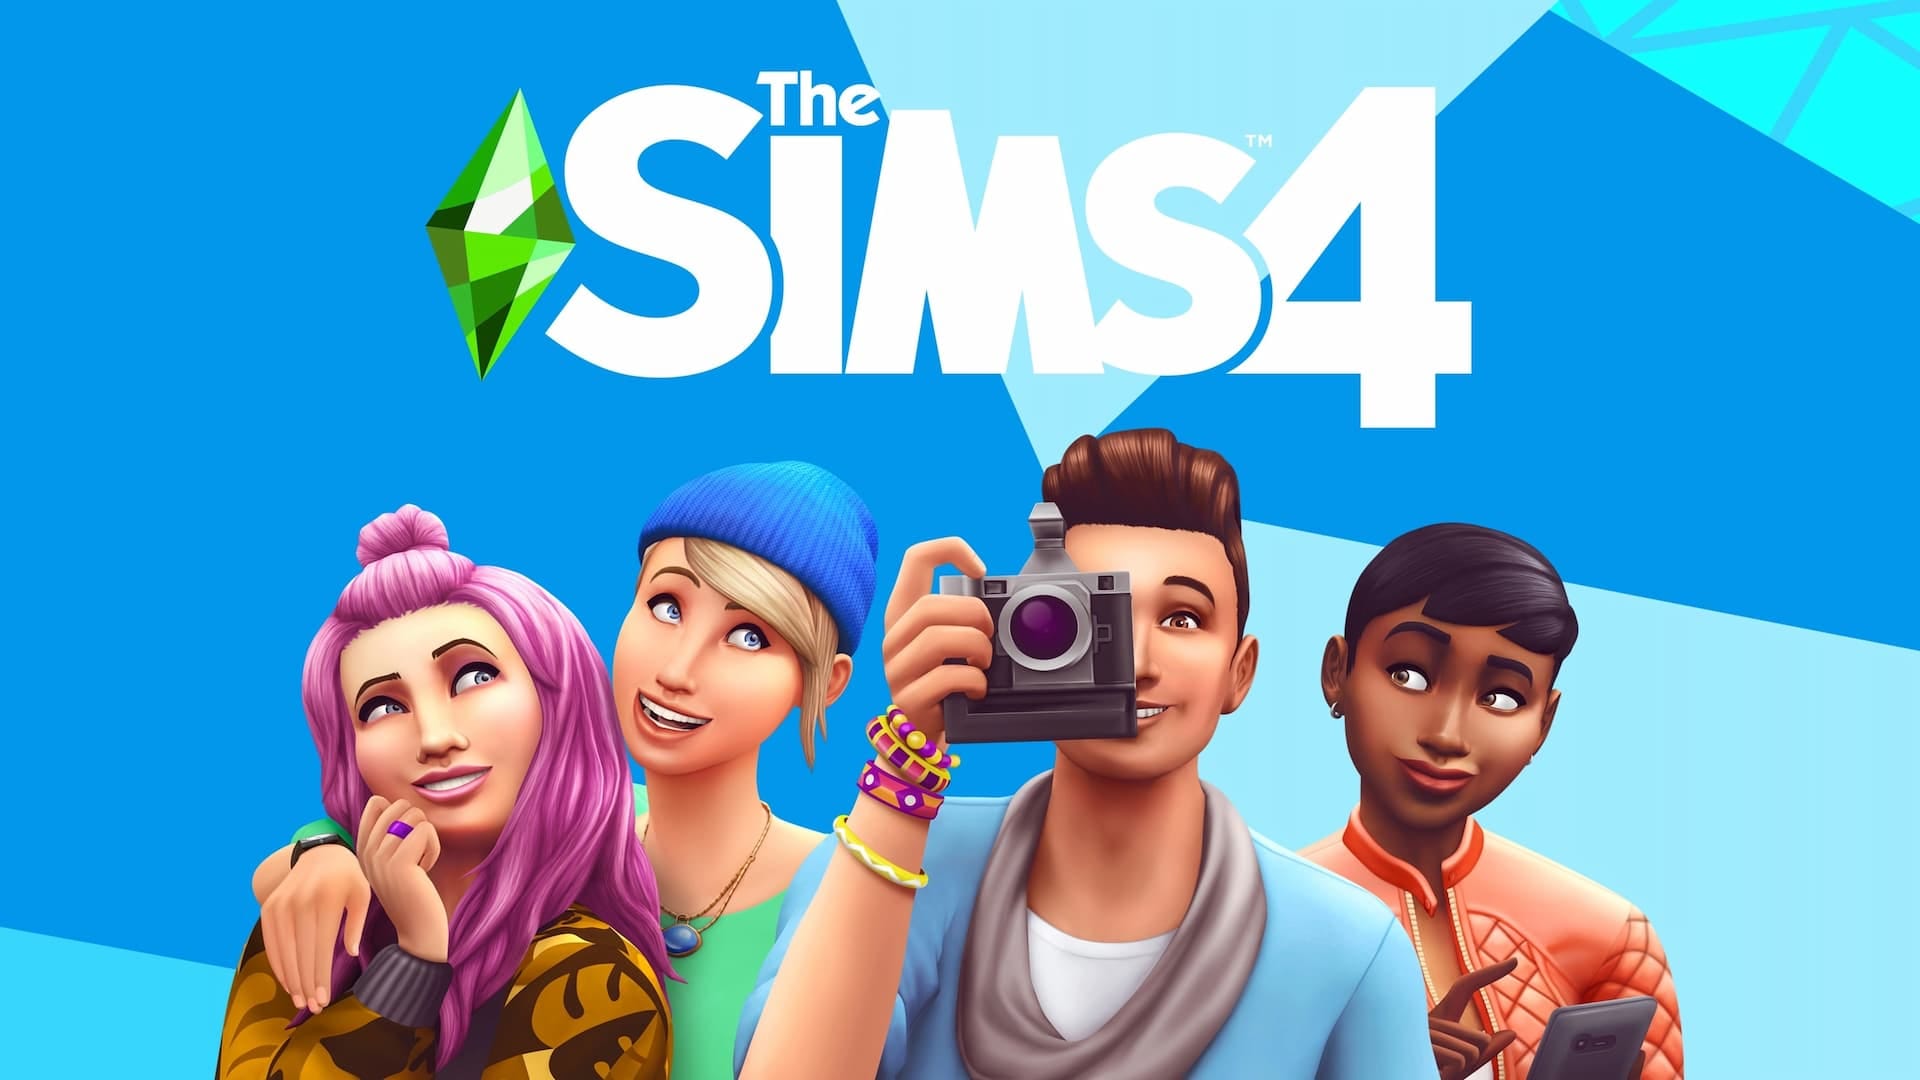 The Sims 4 - EA Play - An Official EA Site